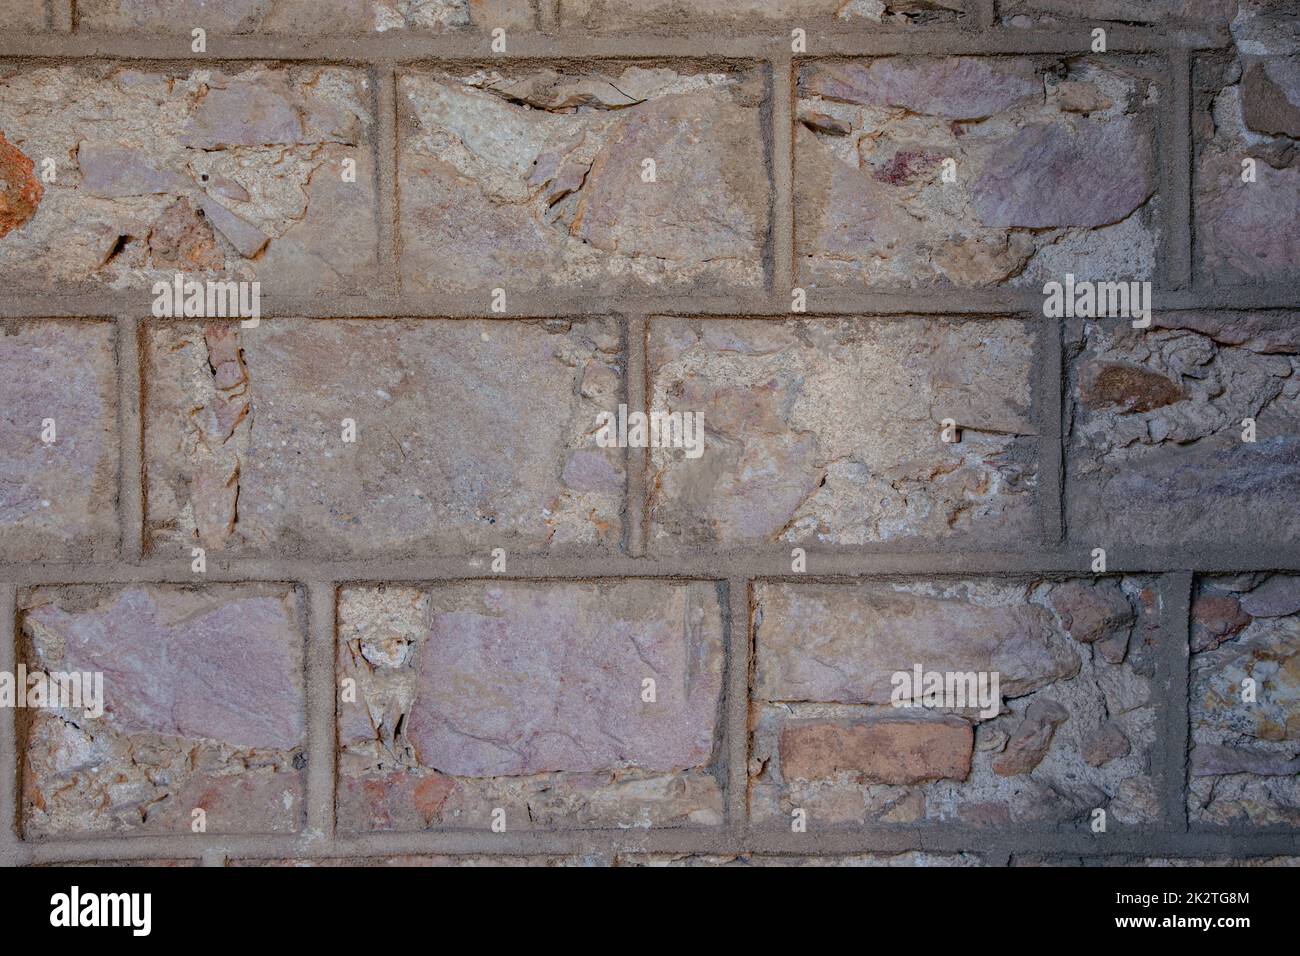 brick wall background and texture. Old brick wall in a background image Stock Photo